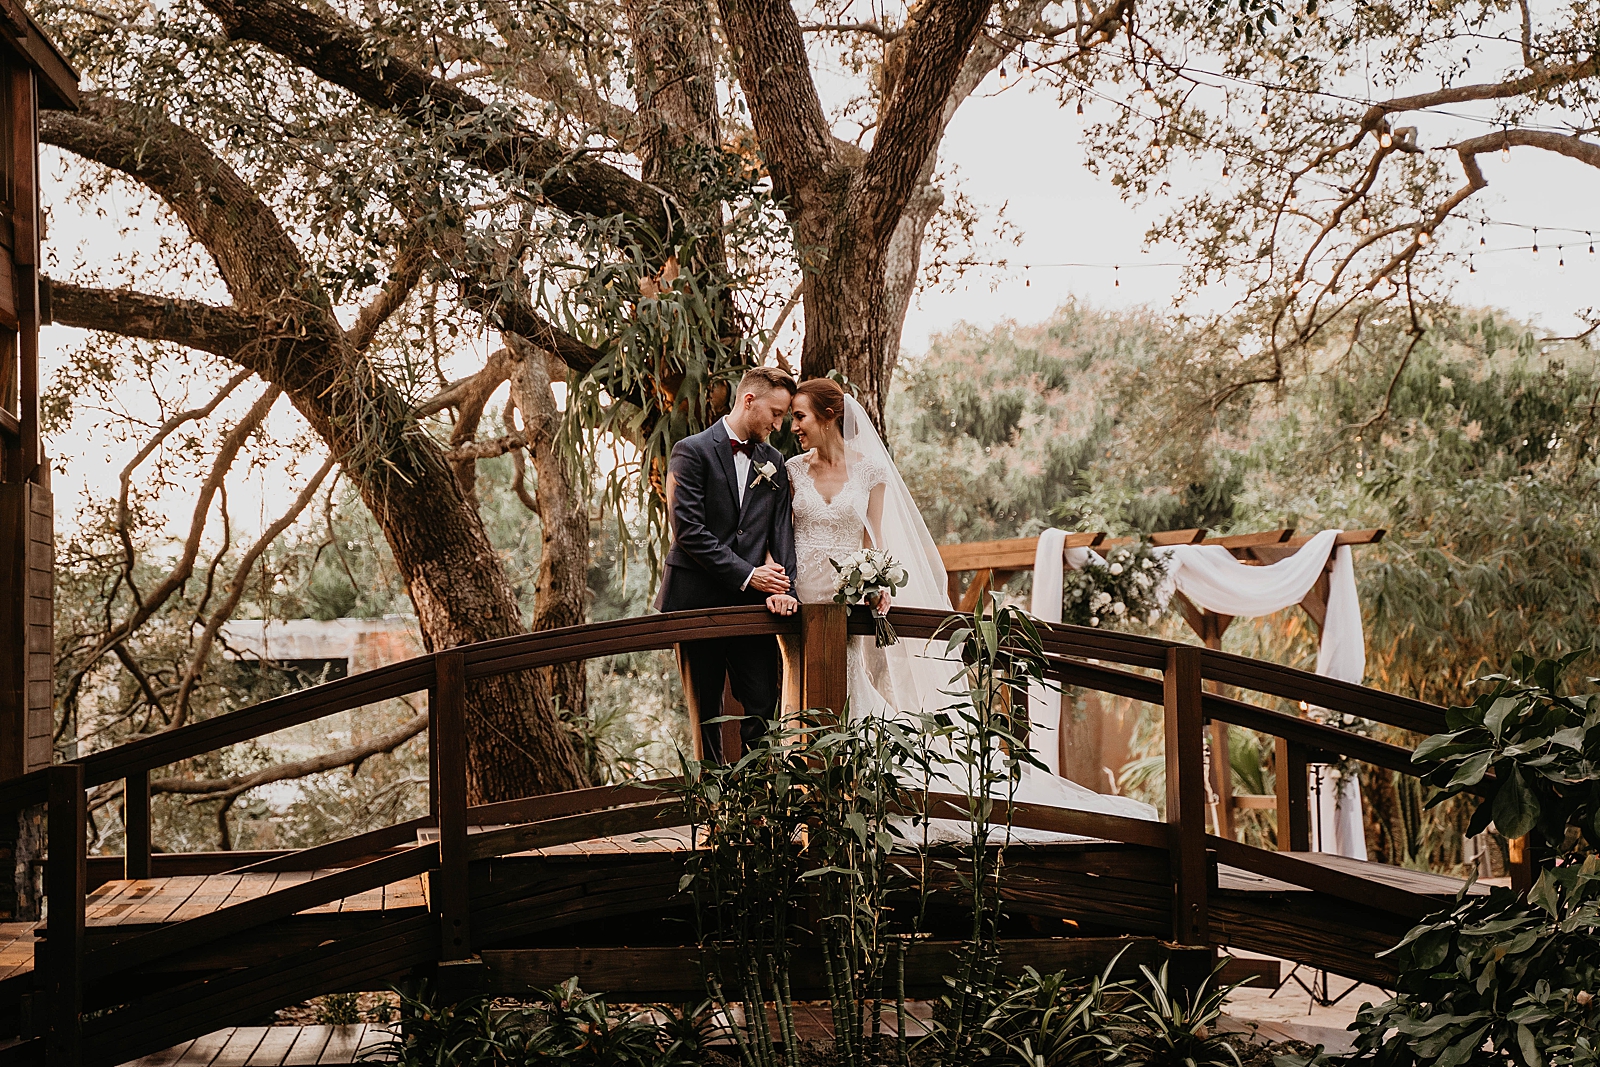 Bride and Groom touching their foreheads on arch bridge with lots of greenery Living Sculptures Sanctuary Wedding Photography captured by South Florida Wedding Photographer Krystal Capone Photography 